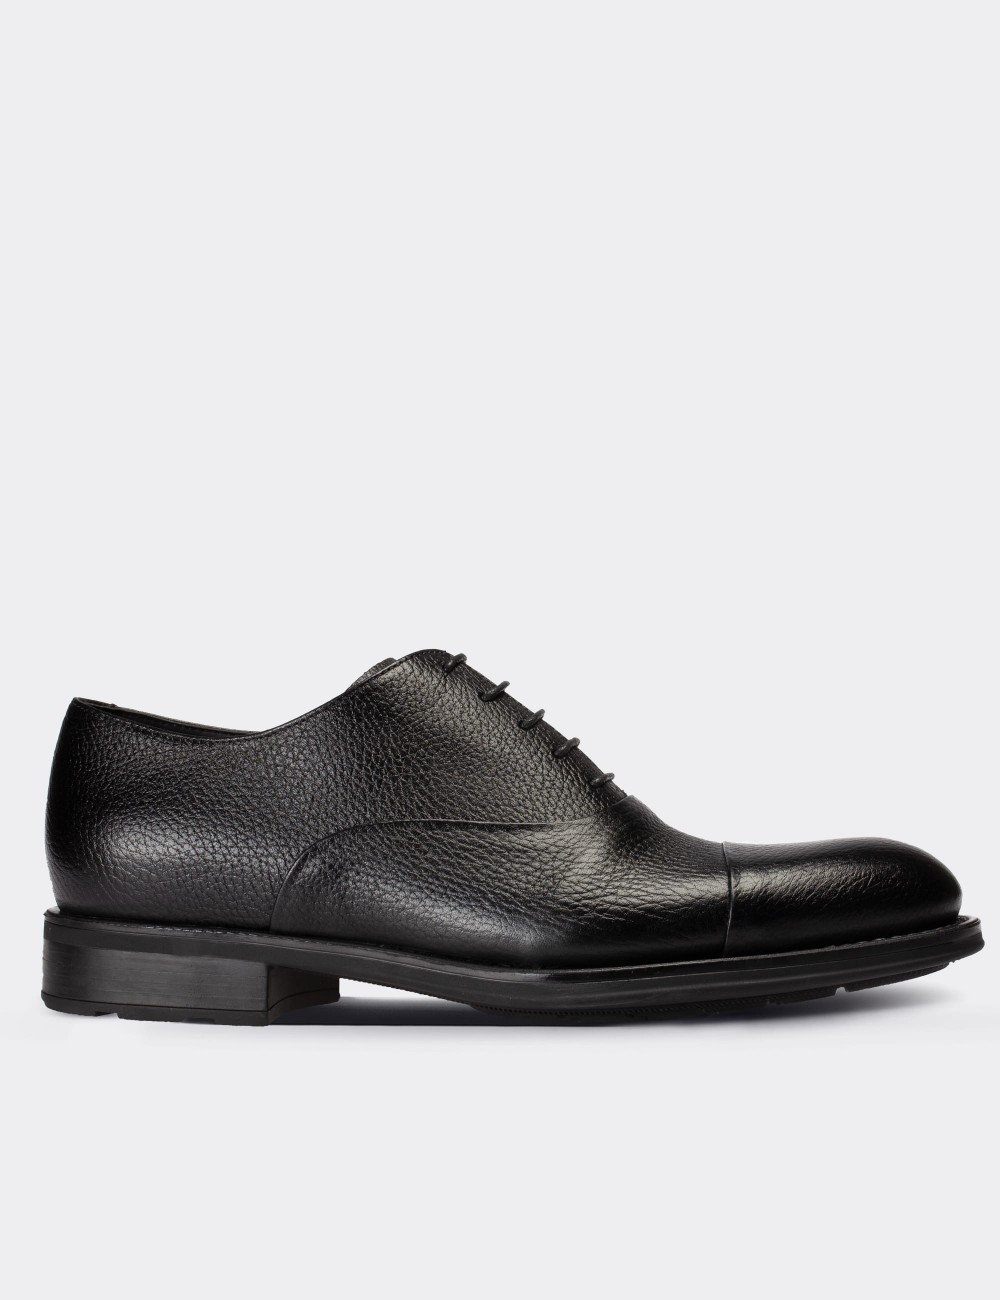 Black  Leather Classic Shoes - 01026MSYHC06